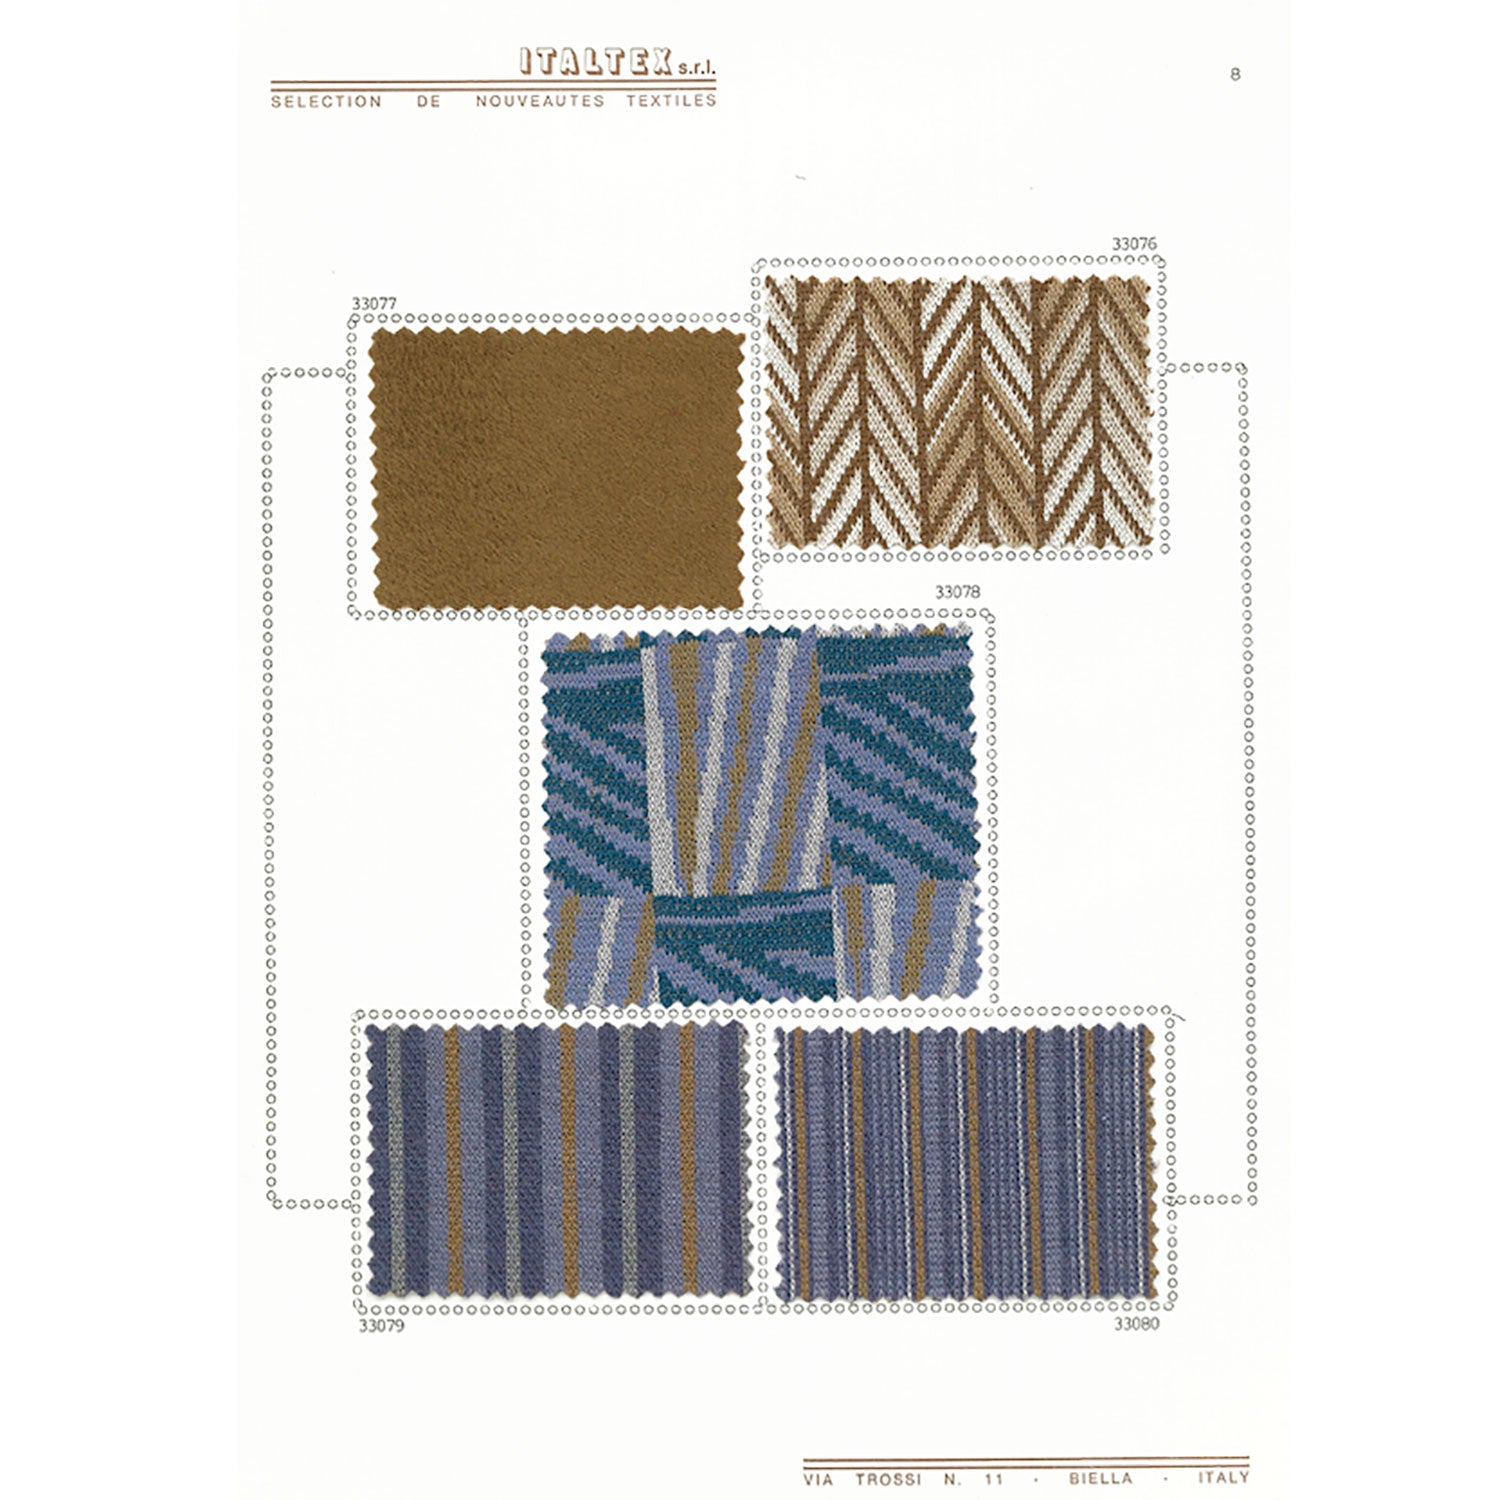 Five fabric swatches of knits for women's wear. One solid brown. One fancy jacquard white and brown shaded herringbone. One patchwork pattern made in jacquard jersey combining brown and white rays on a light blue ground, or a tone on tone fancy pattern in blue. Two striped patterns where white and brown stripes lay on a blue ground